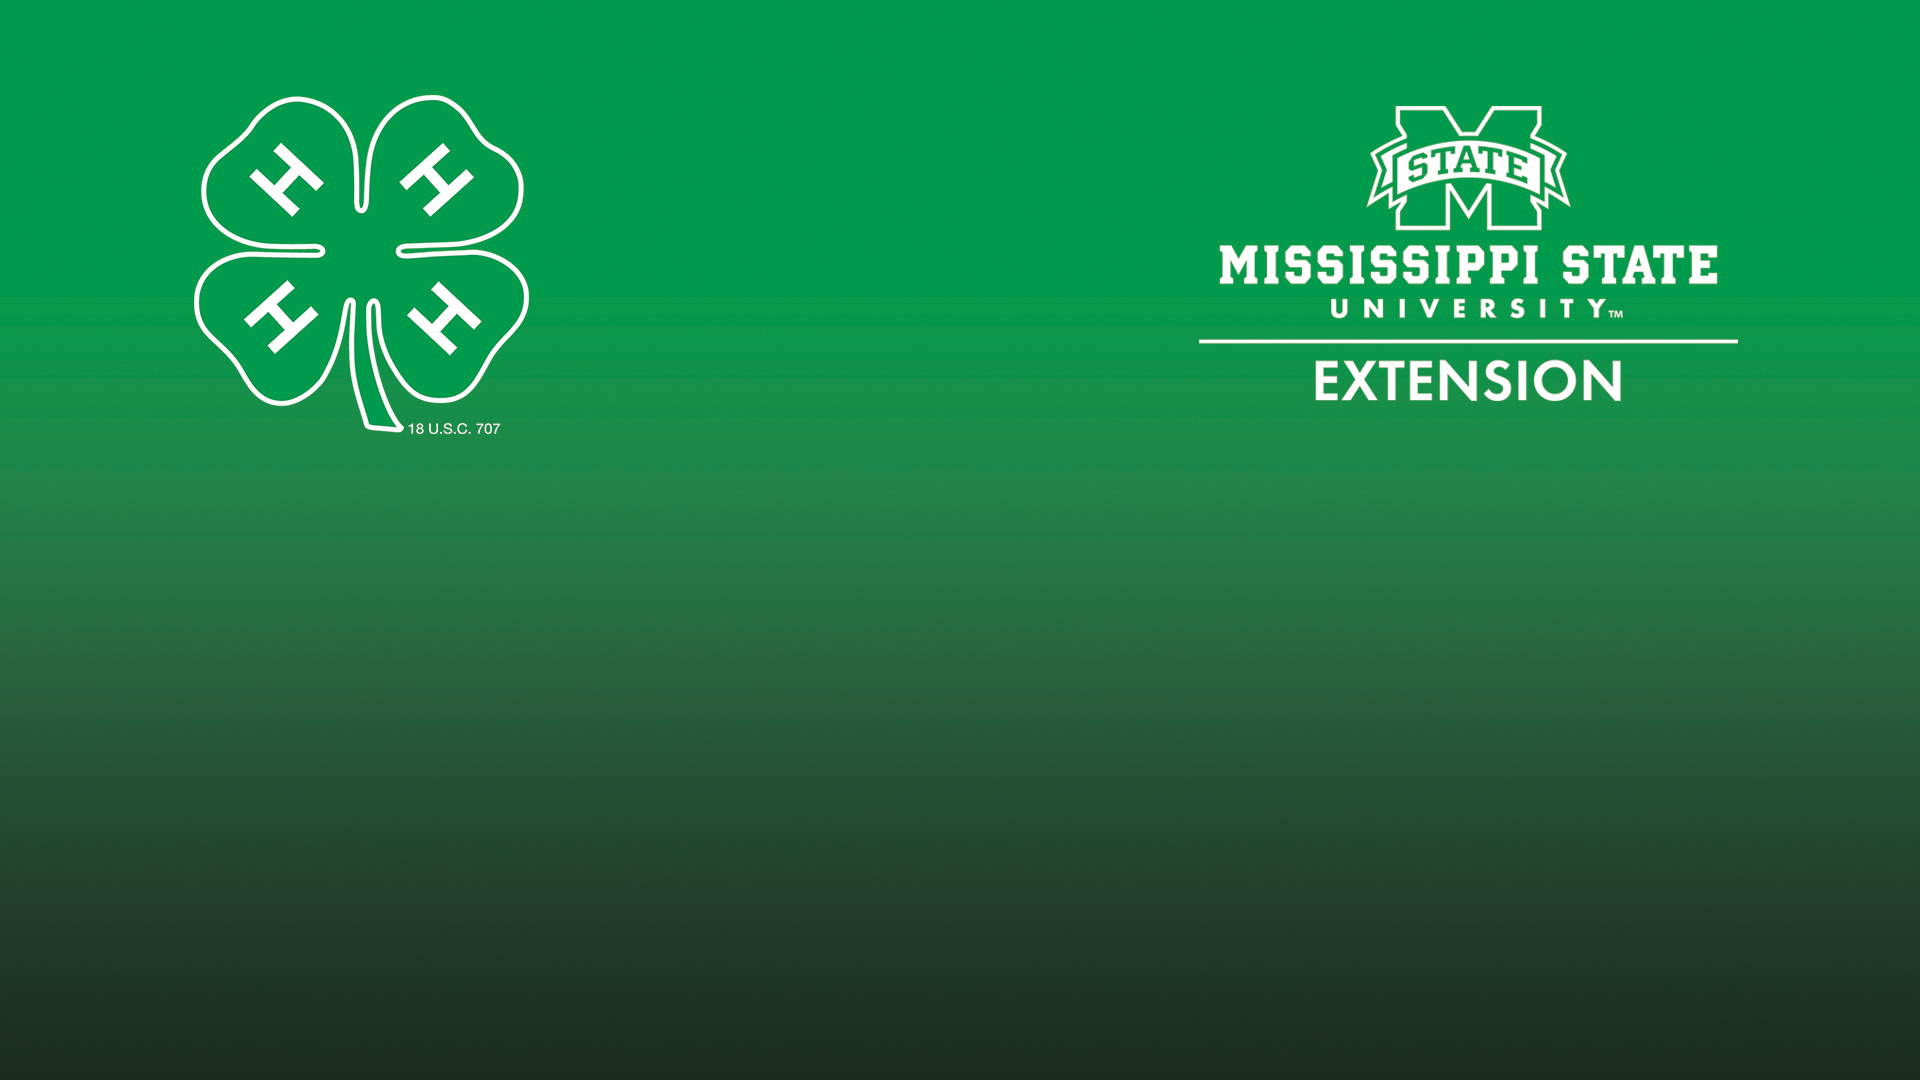 Green gradient background with 4-H and Extension logos.